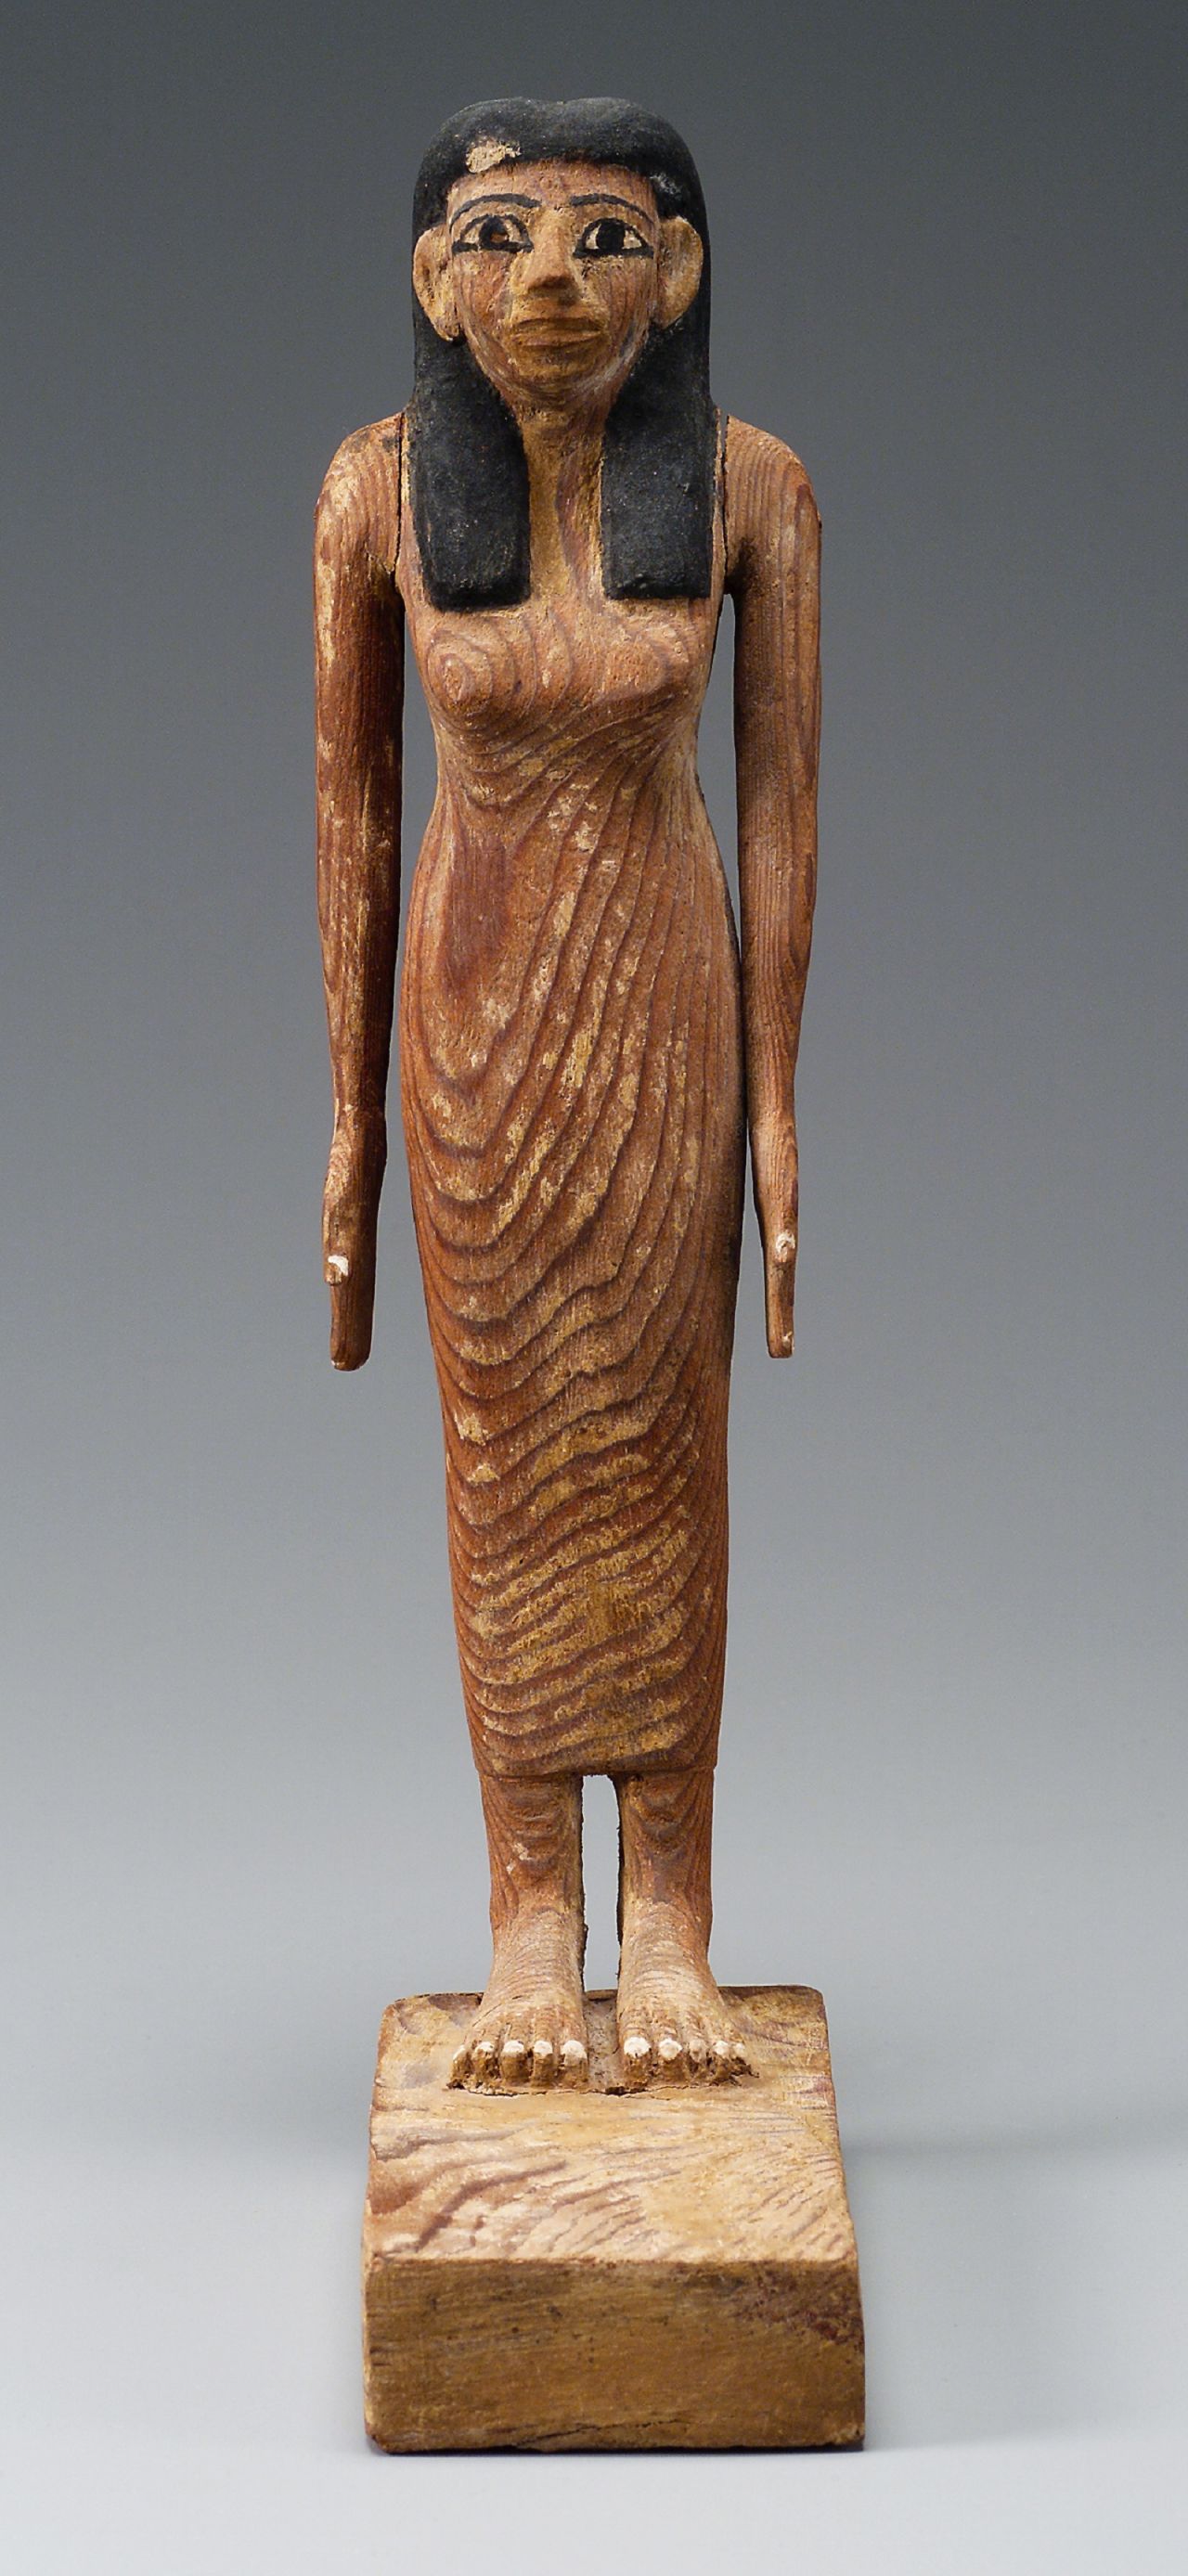 A female figure was also found, thought to be Lady Djehutynakht. These funerary figurines, <a href="http://www.mfa.org/collections/object/model-of-a-transport-boat-143700" target="_blank" target="_blank">shawabtys</a>, were meant to act as a substitute for the dead in the afterlife, when the gods asked them to perform menial tasks.